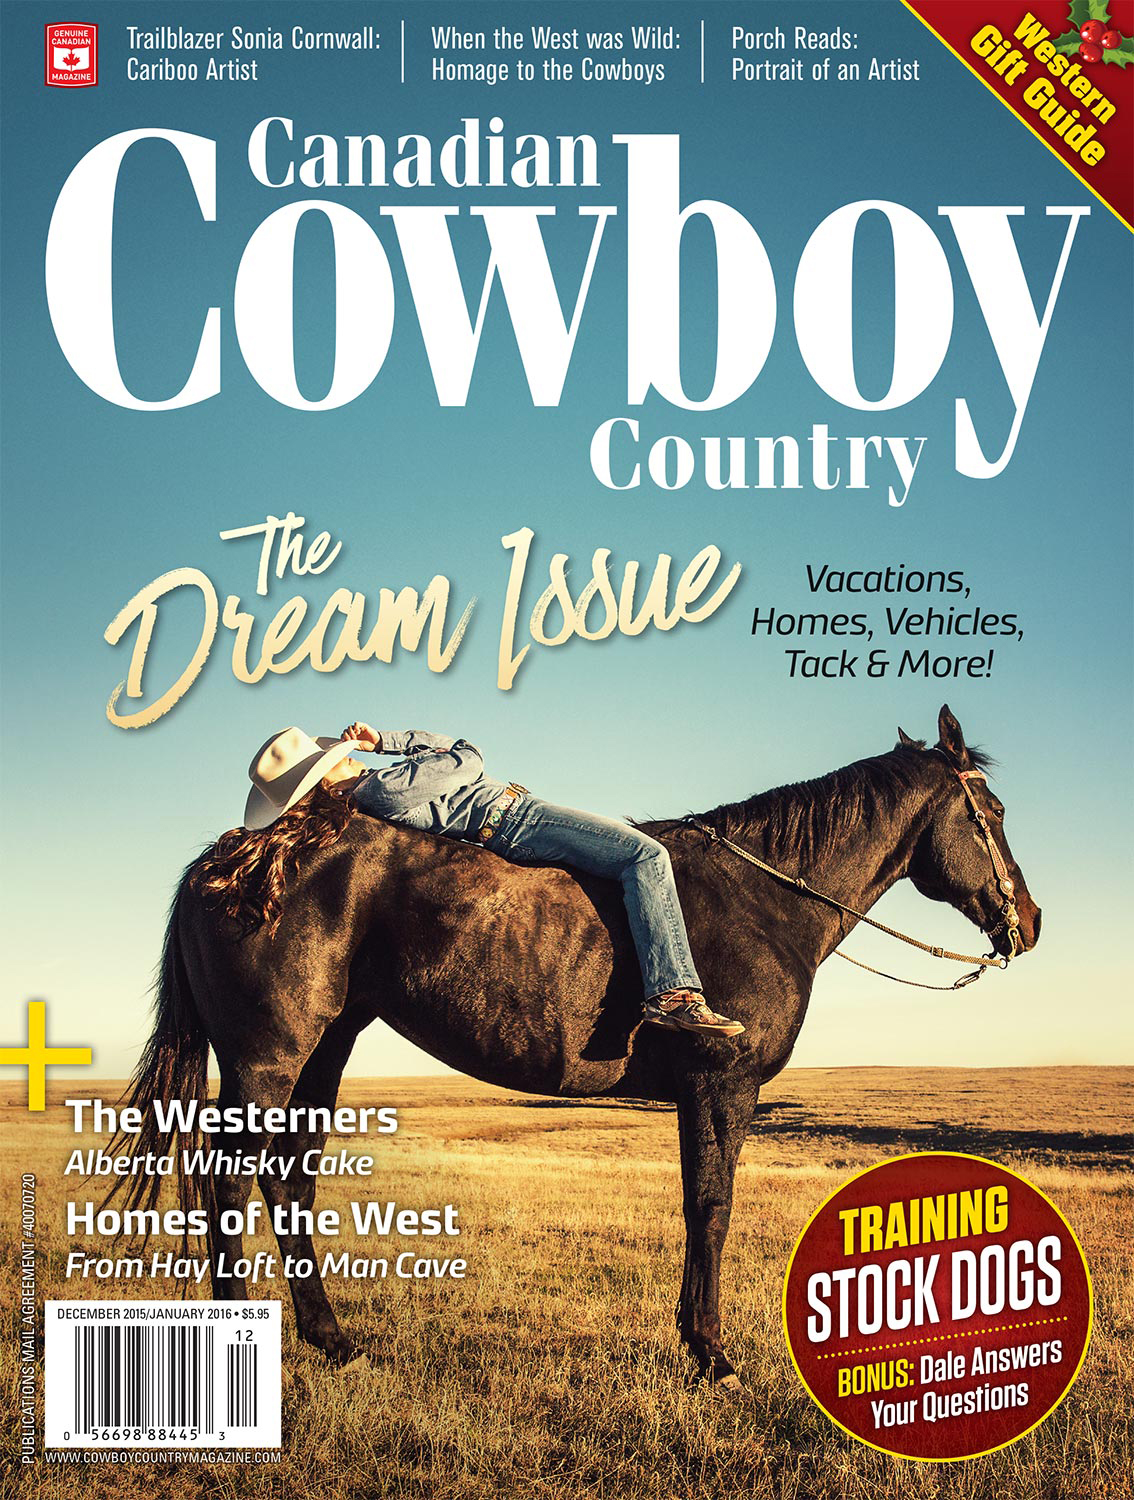 Photo-of-Horse-Published-on-Cover-of-Canadian-Cowboy-Country-Magazine.jpg